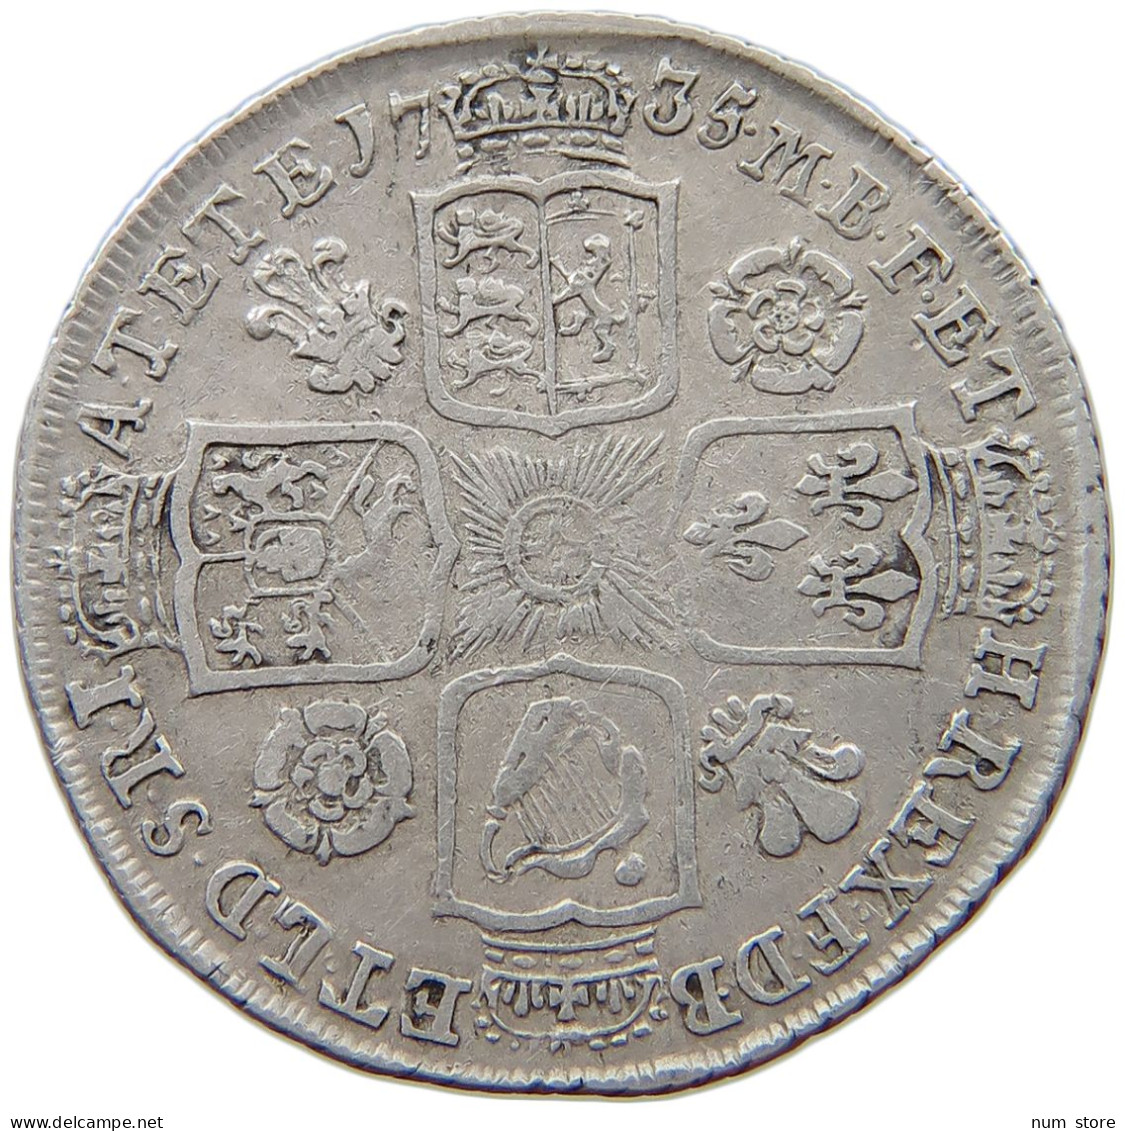 GREAT BRITAIN SHILLING 1735 George II. 1727-1760. #t148 0243 - H. 1 Shilling